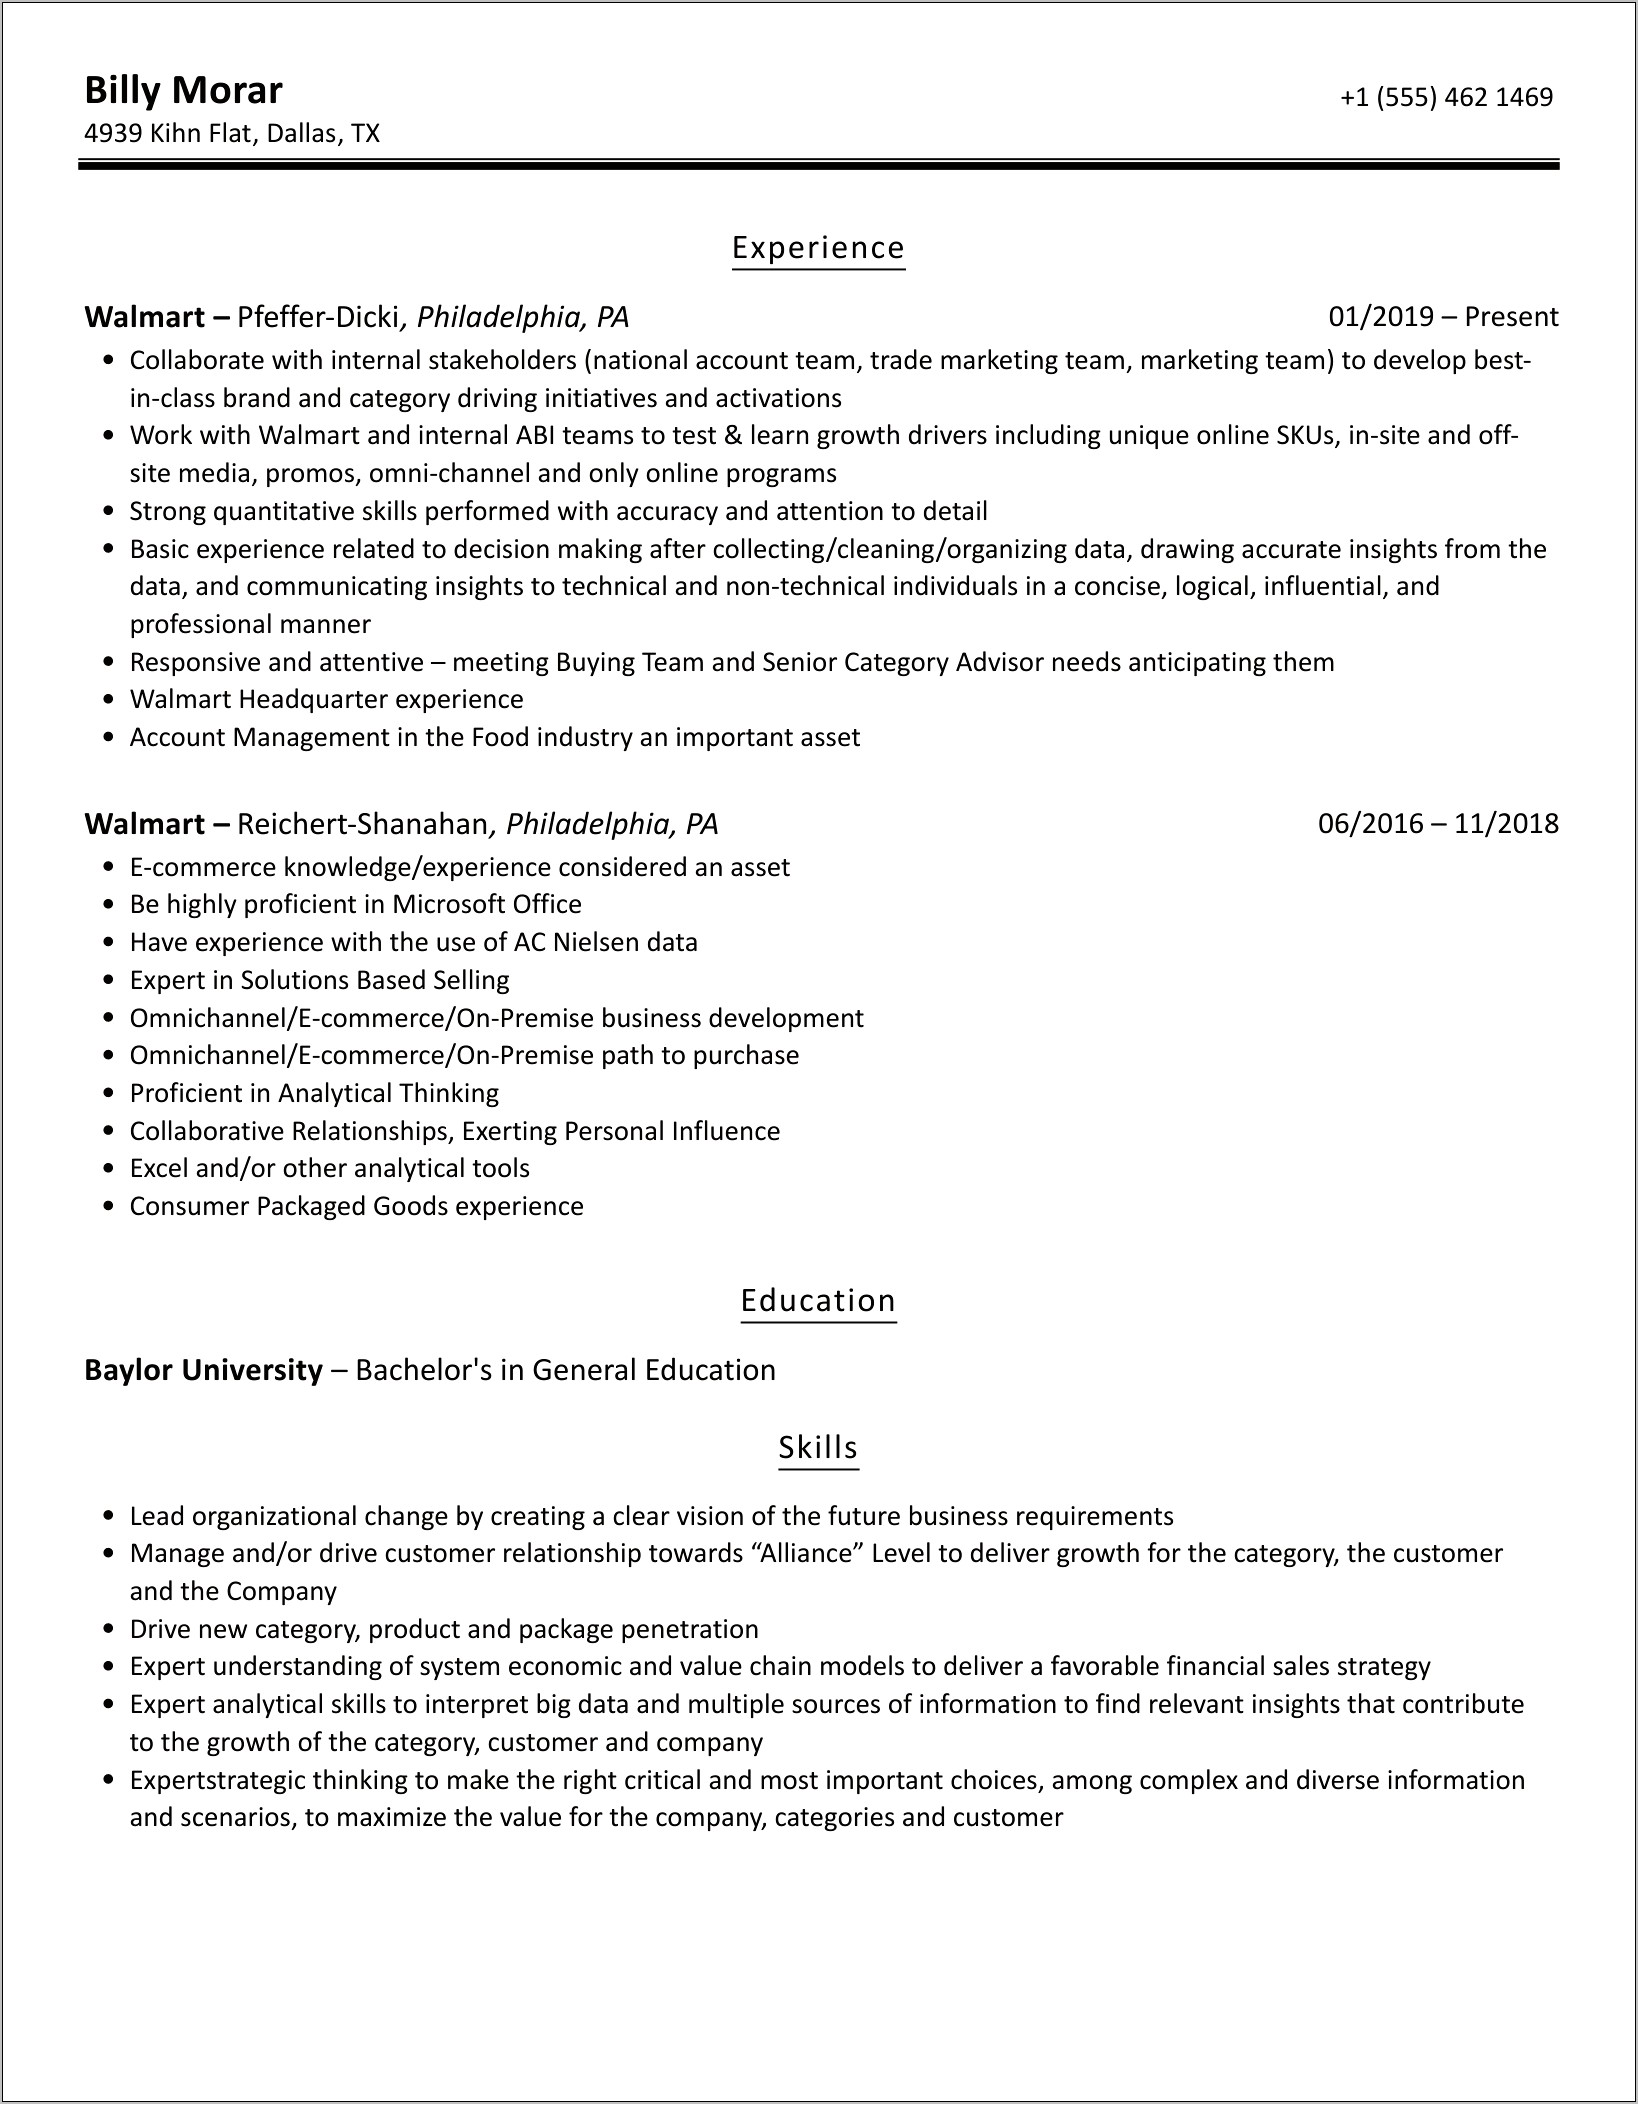 Resume Written By Walmart Manager